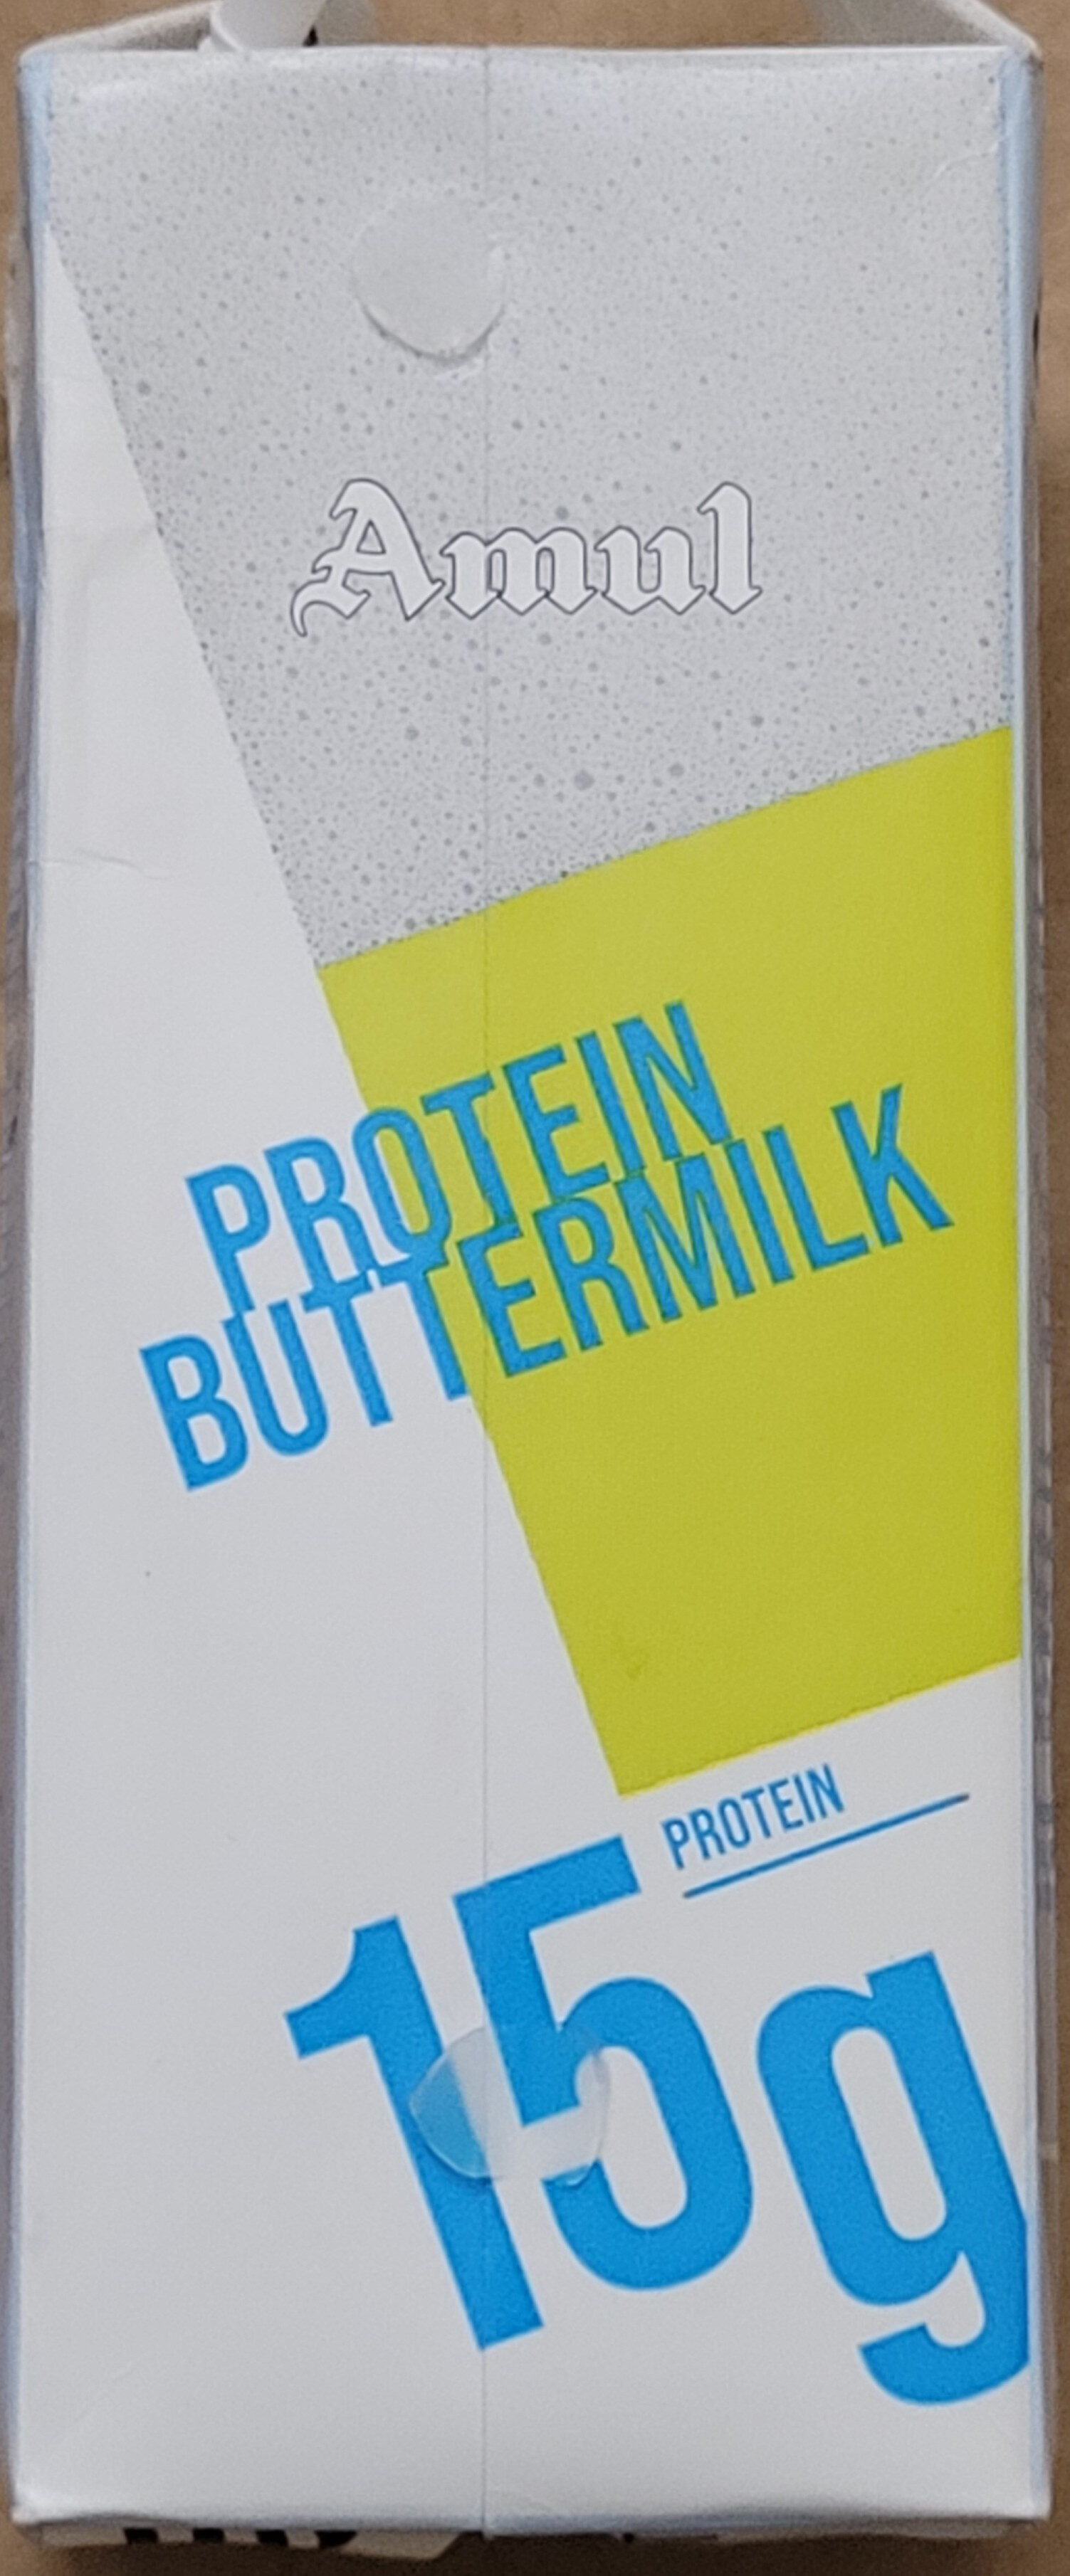 Protein Buttermilk - Product